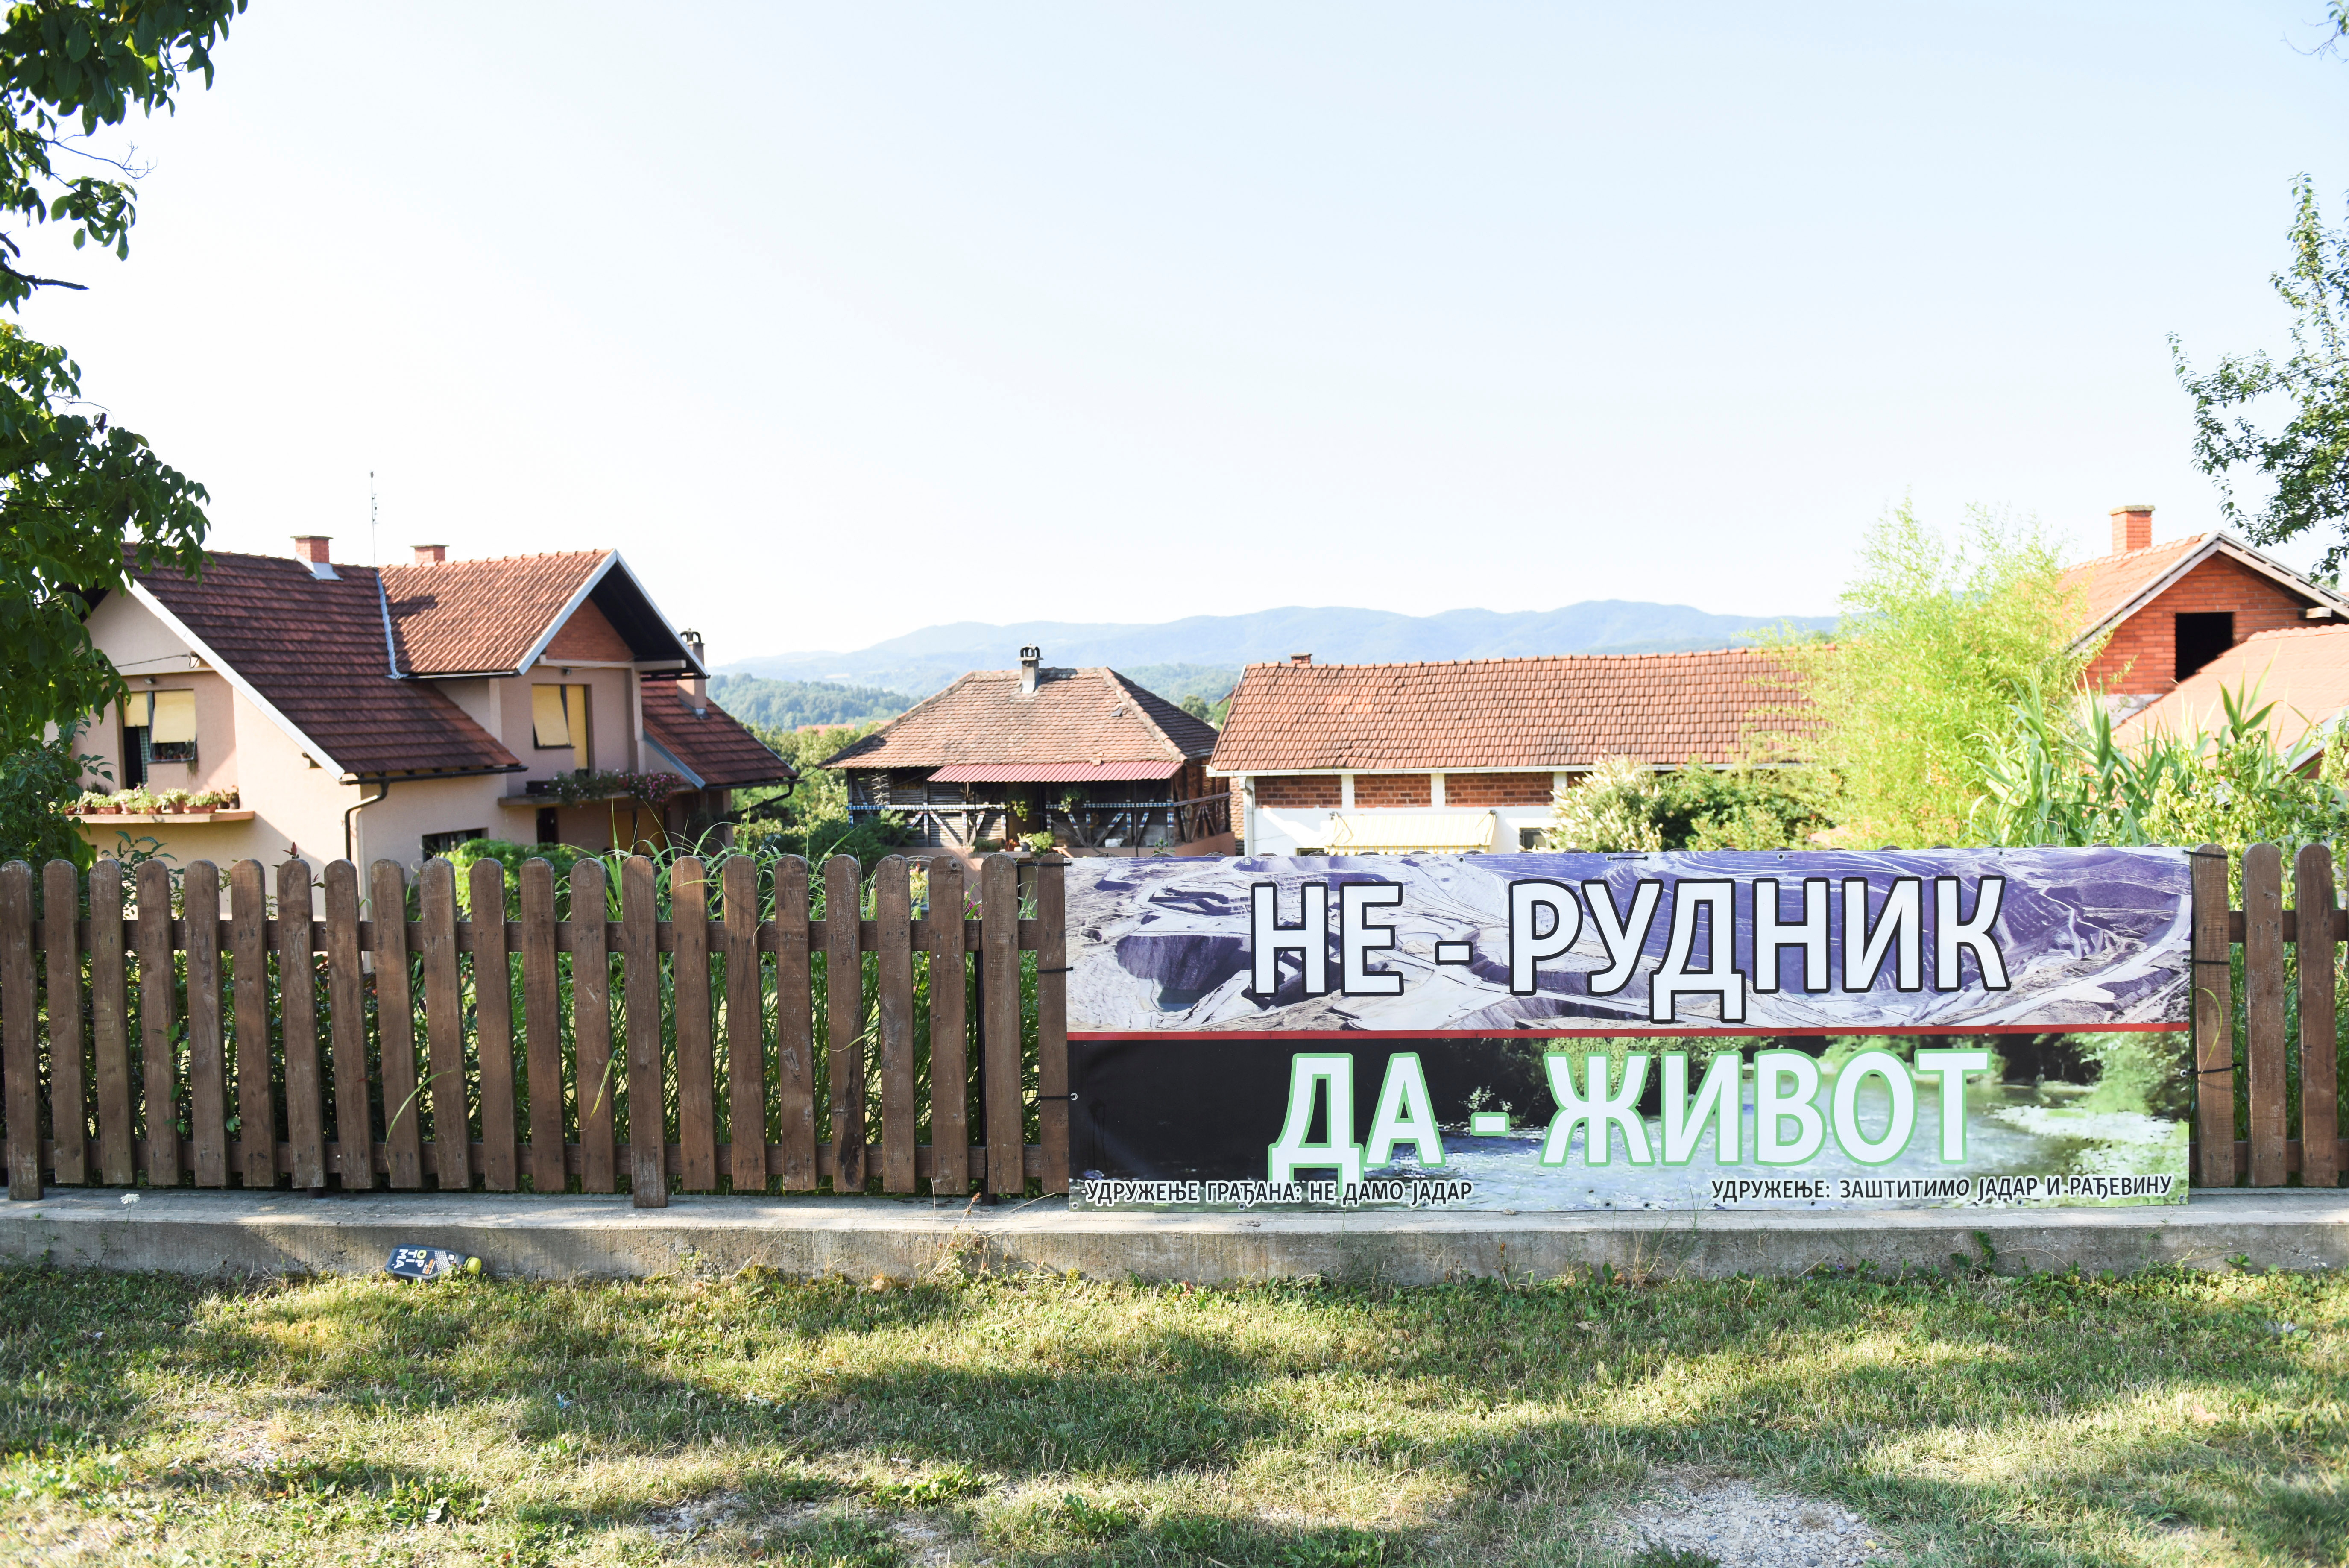 "No mine, yes life", says the poster displayed along the roadside in the village of Gornje Nedeljice